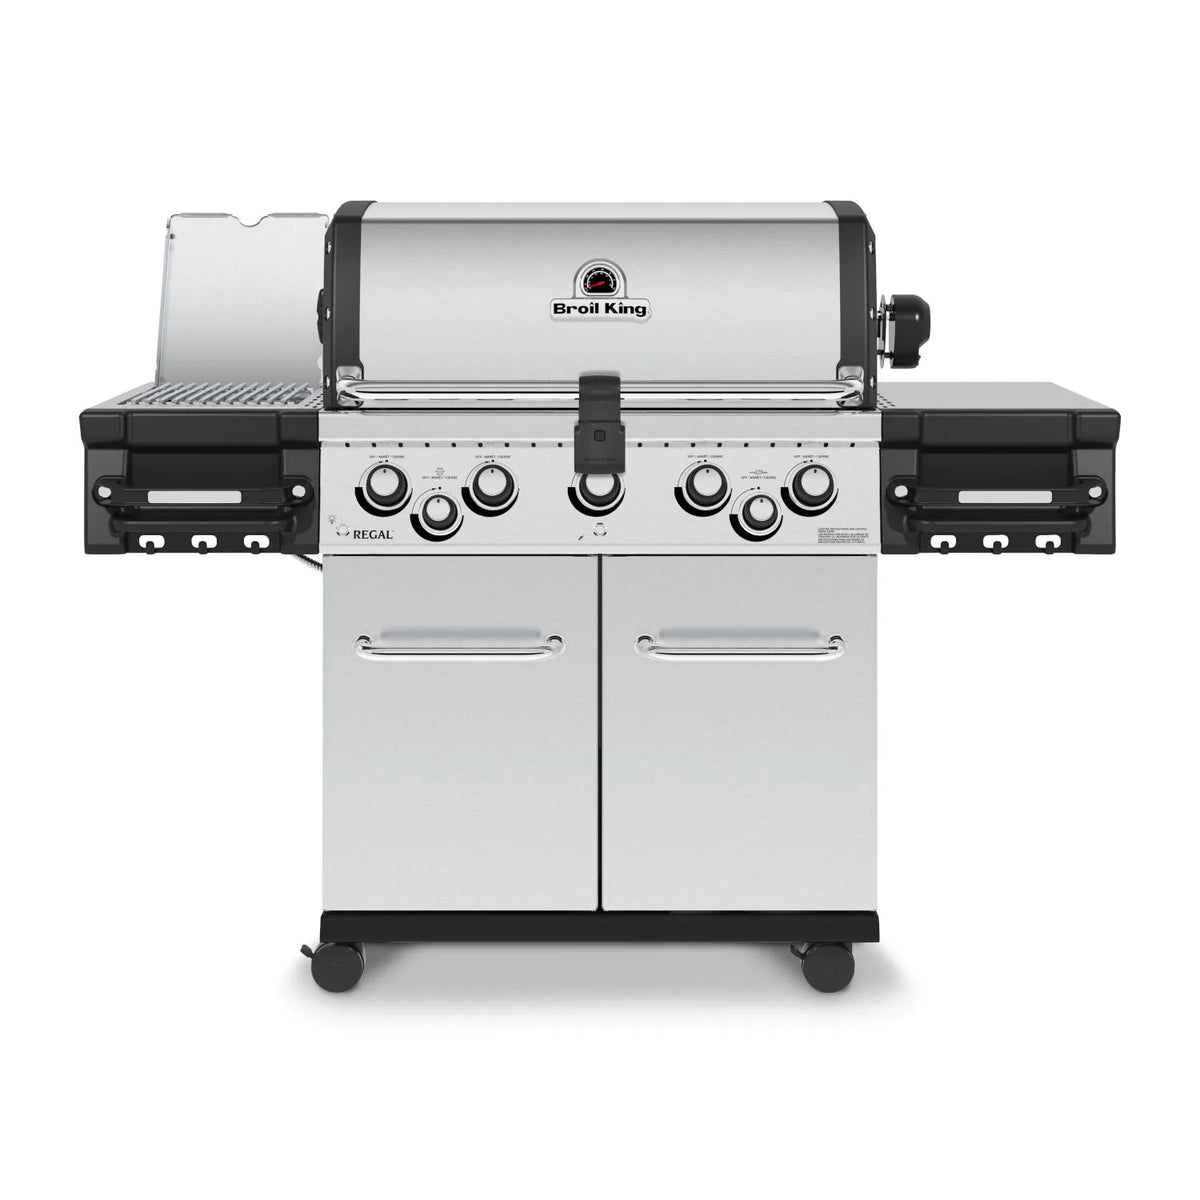 Broil King 958944 Regal S 590 PRO IR 5-Burner Propane Gas Grill With Rotisserie &amp; Infrared Side Burner - Stainless Steel